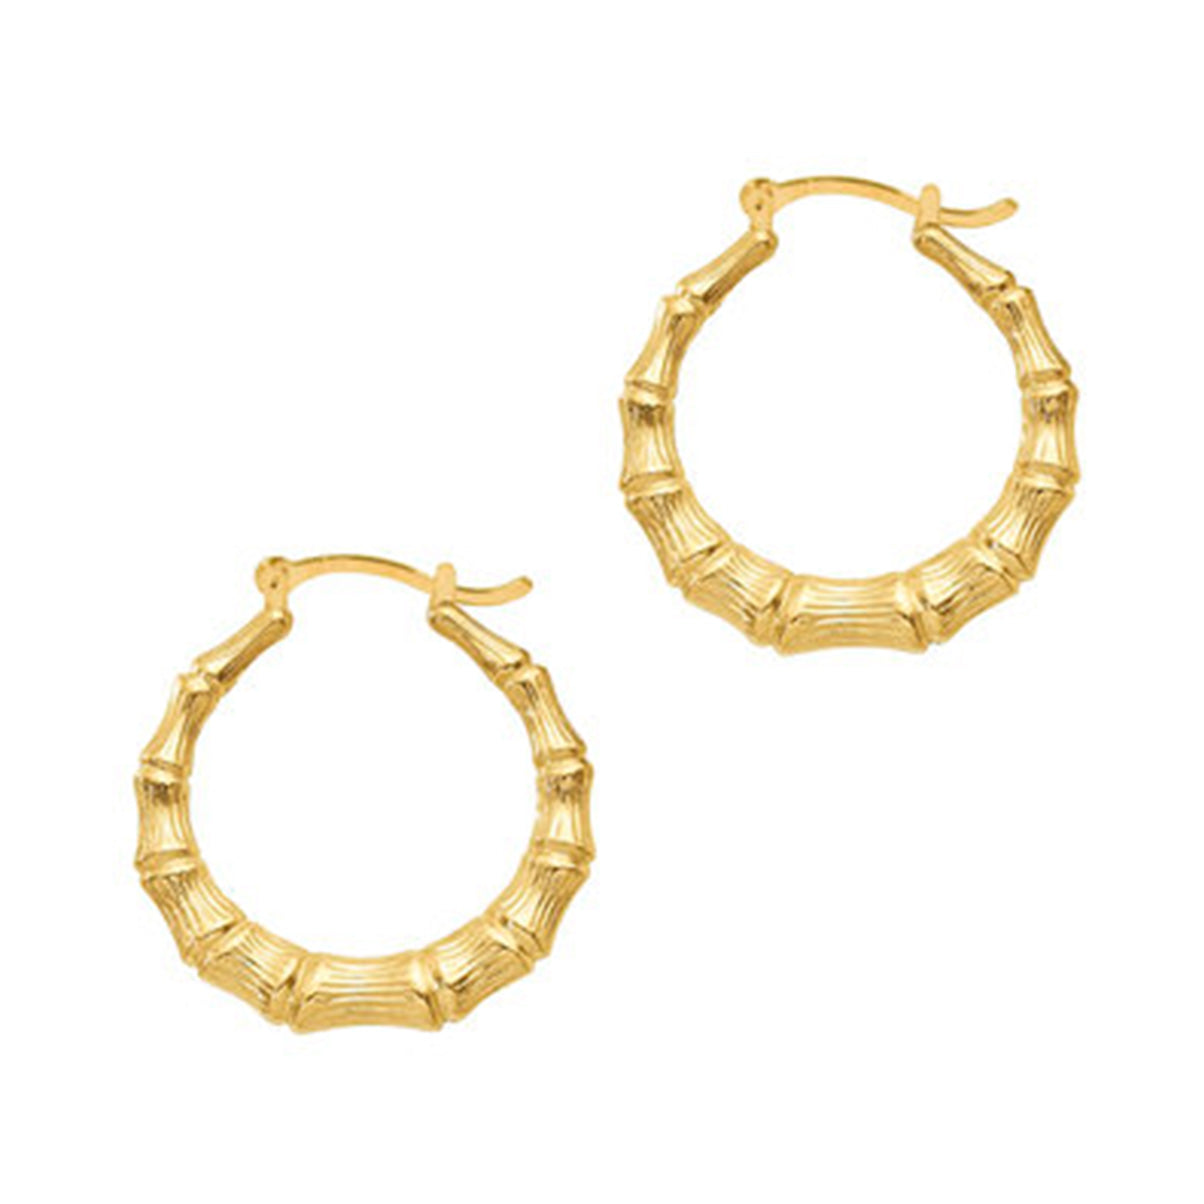 CUSTOM PERSONALIZED: Gold-Plated Bamboo Earrings with Custom